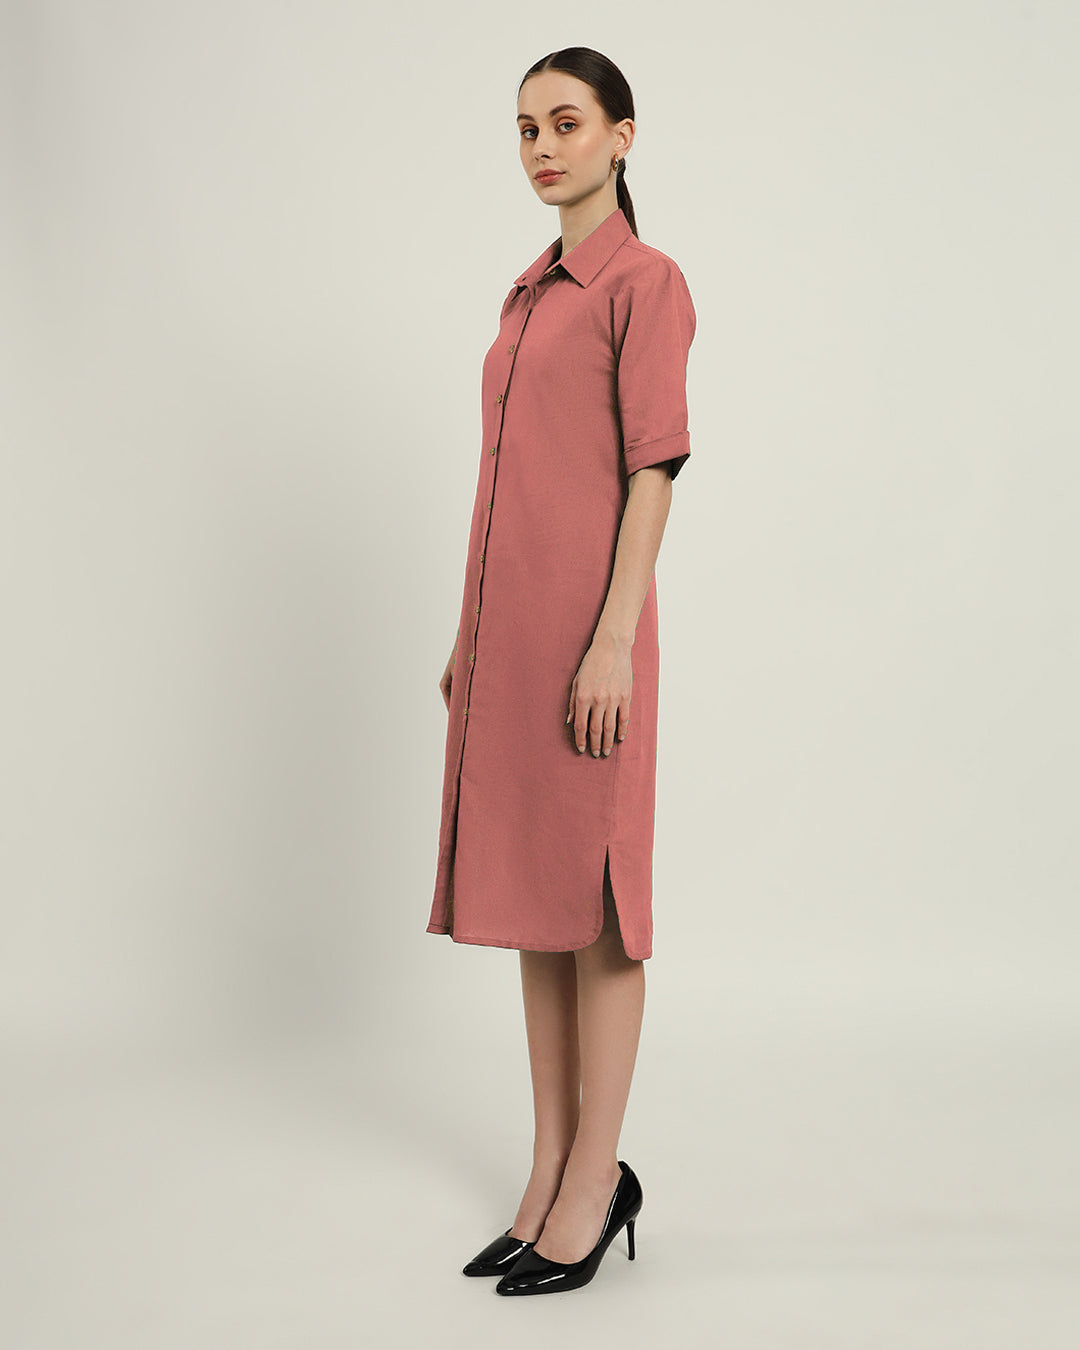 The Tampa Ivory Pink Cotton Dress